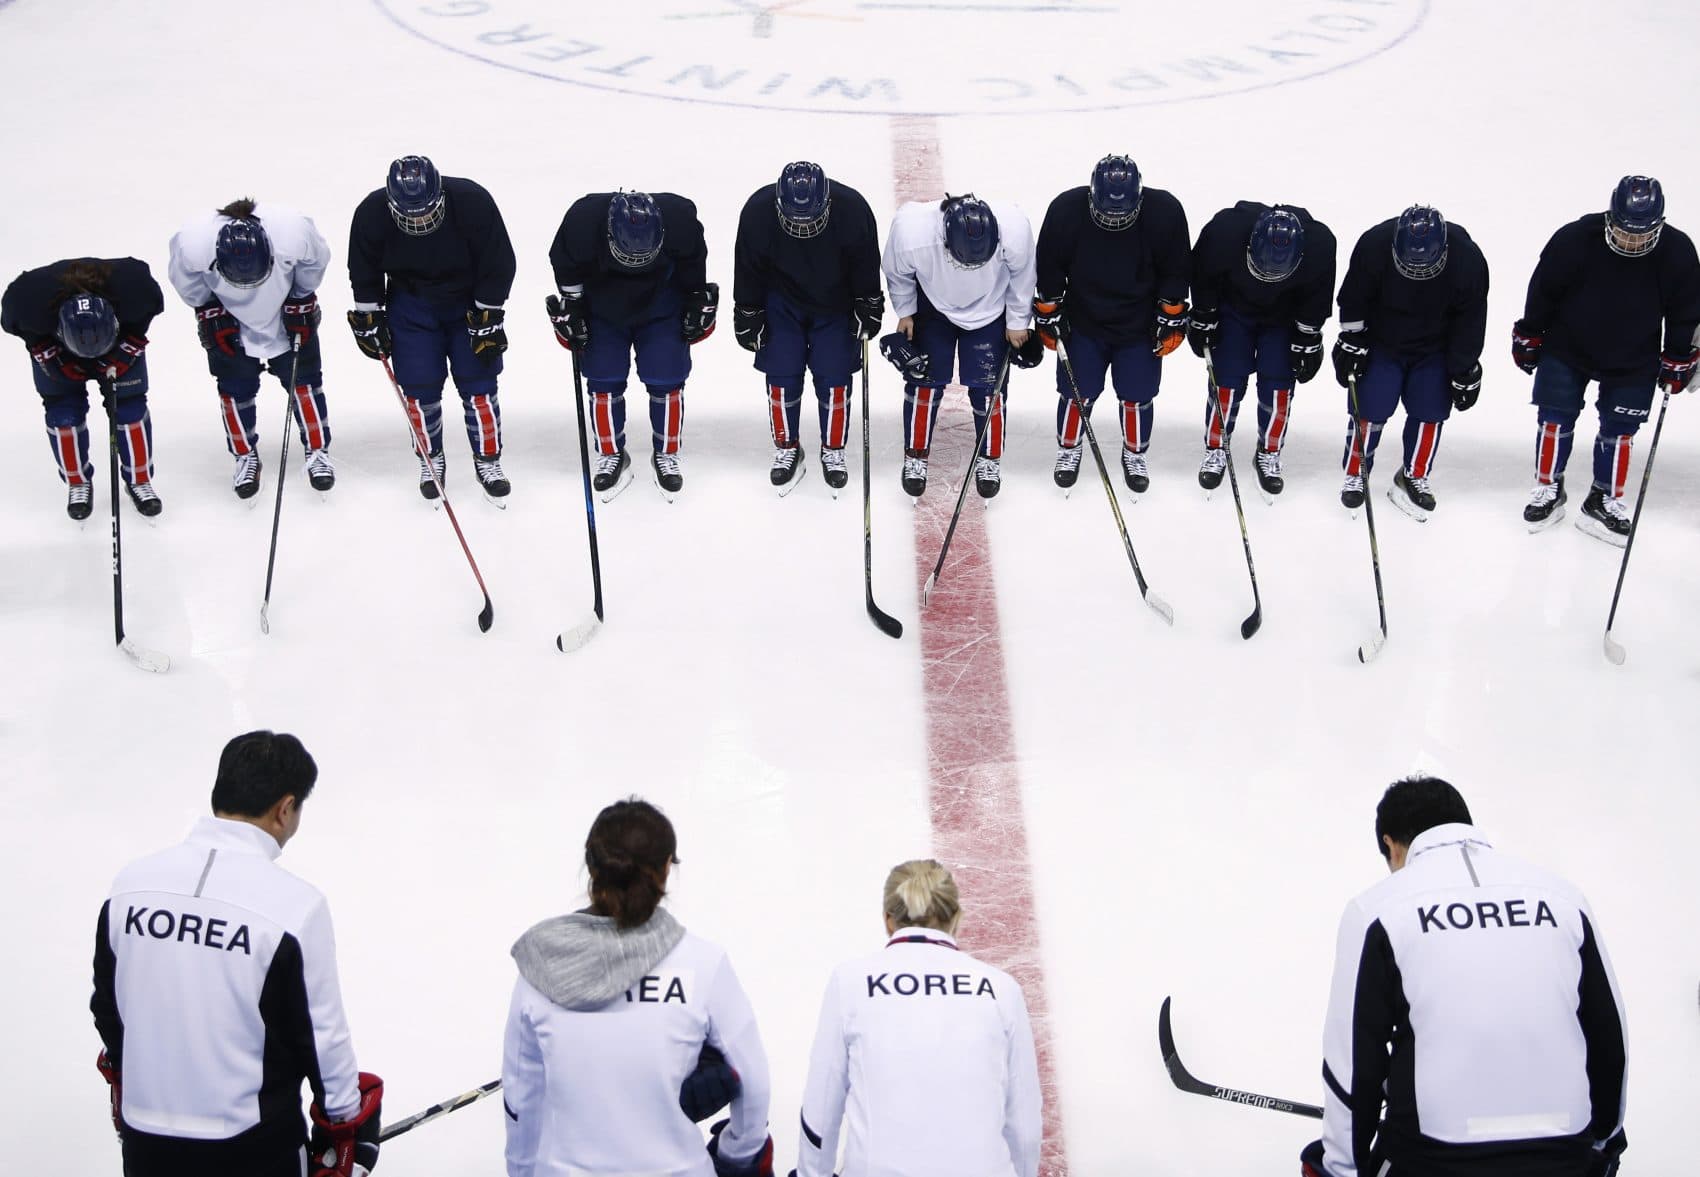 The combined Korean women's ice hockey players bow to their coaching staff after a practice session prior to the 2018 Winter Olympics in Gangneung, South Korea, Monday, Feb. 5, 2018. (Jae C. Hong/AP)